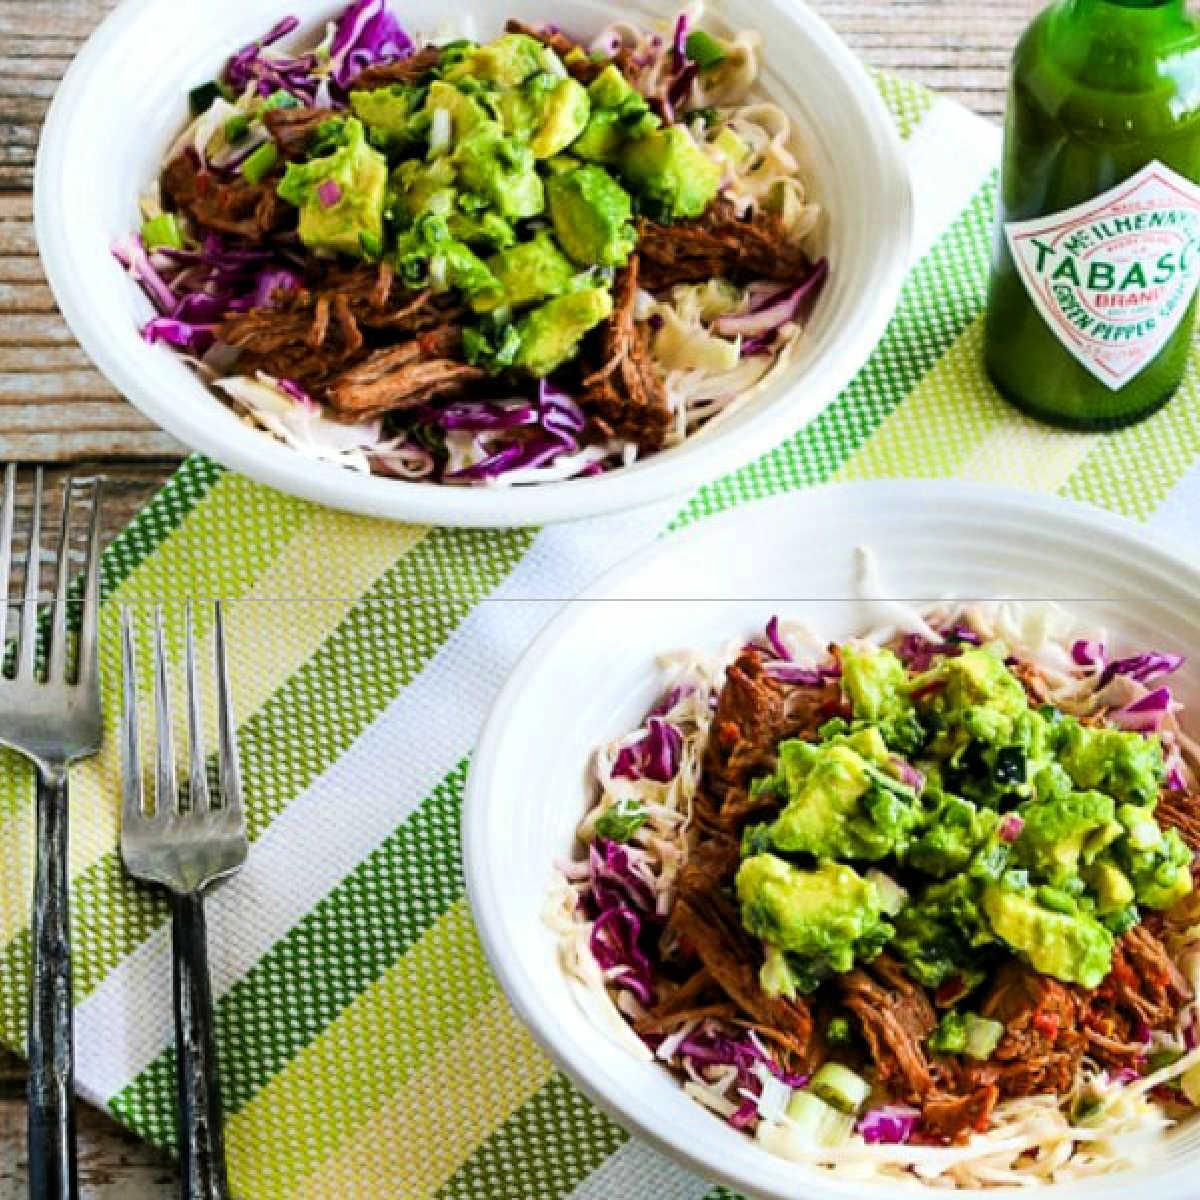 Green Chile Shredded Beef Cabbage Bowl shown in two serving bowls with avocado salsa.